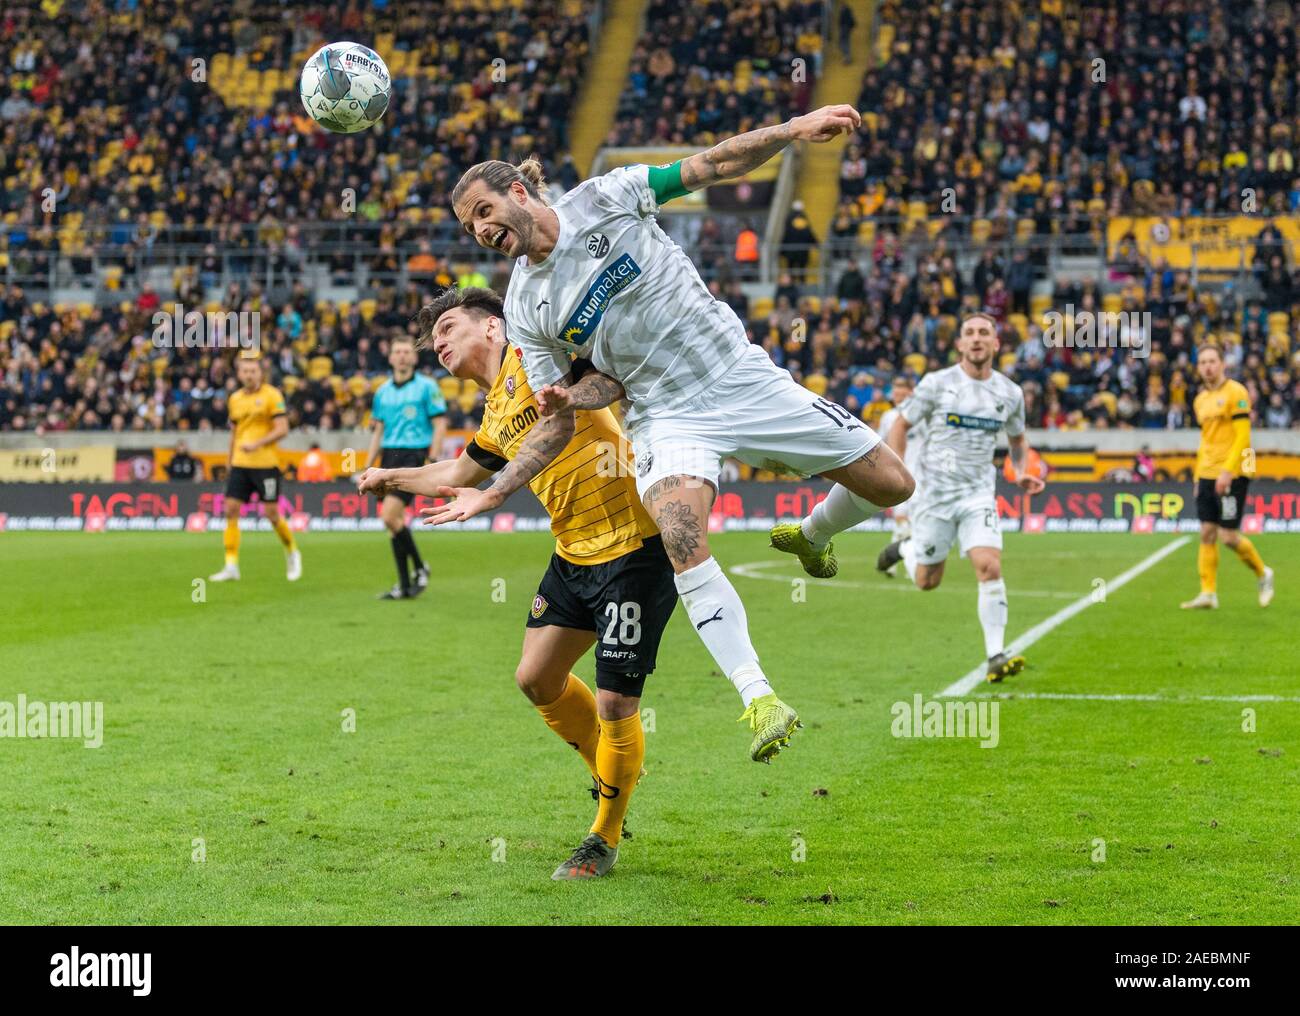 Dresden, Germany. 08th Dec, 2019. Soccer: 2nd Bundesliga, SG Dynamo Dresden - SV Sandhausen, 16th matchday, in the Rudolf Harbig Stadium. Dynamos Baris Atik (l) against Sandhausen's Dennis Diekmeier. Credit: Robert Michael/dpa-Zentralbild/dpa - IMPORTANT NOTE: In accordance with the requirements of the DFL Deutsche Fußball Liga or the DFB Deutscher Fußball-Bund, it is prohibited to use or have used photographs taken in the stadium and/or the match in the form of sequence images and/or video-like photo sequences./dpa/Alamy Live News Stock Photo